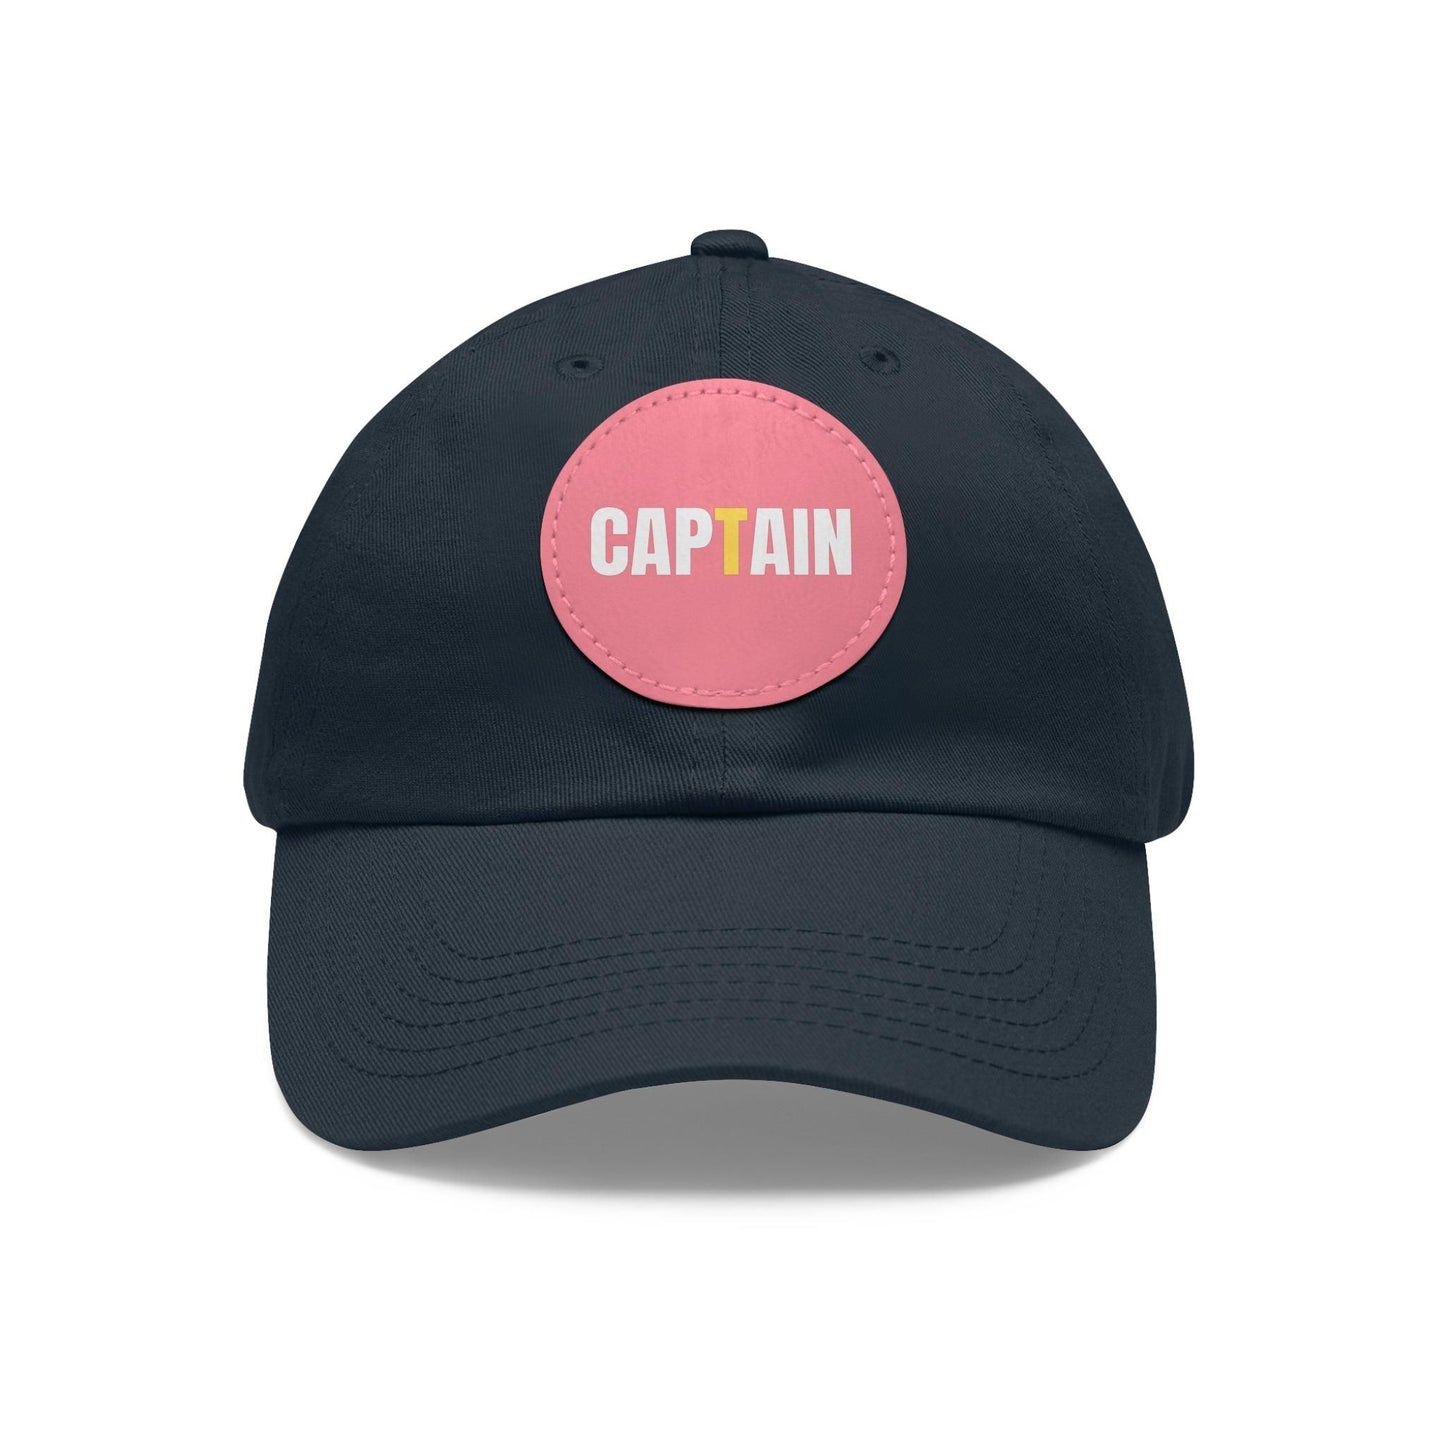 Captain Baseball Hat with Leather Patch Cap Navy / Pink patch Circle One size